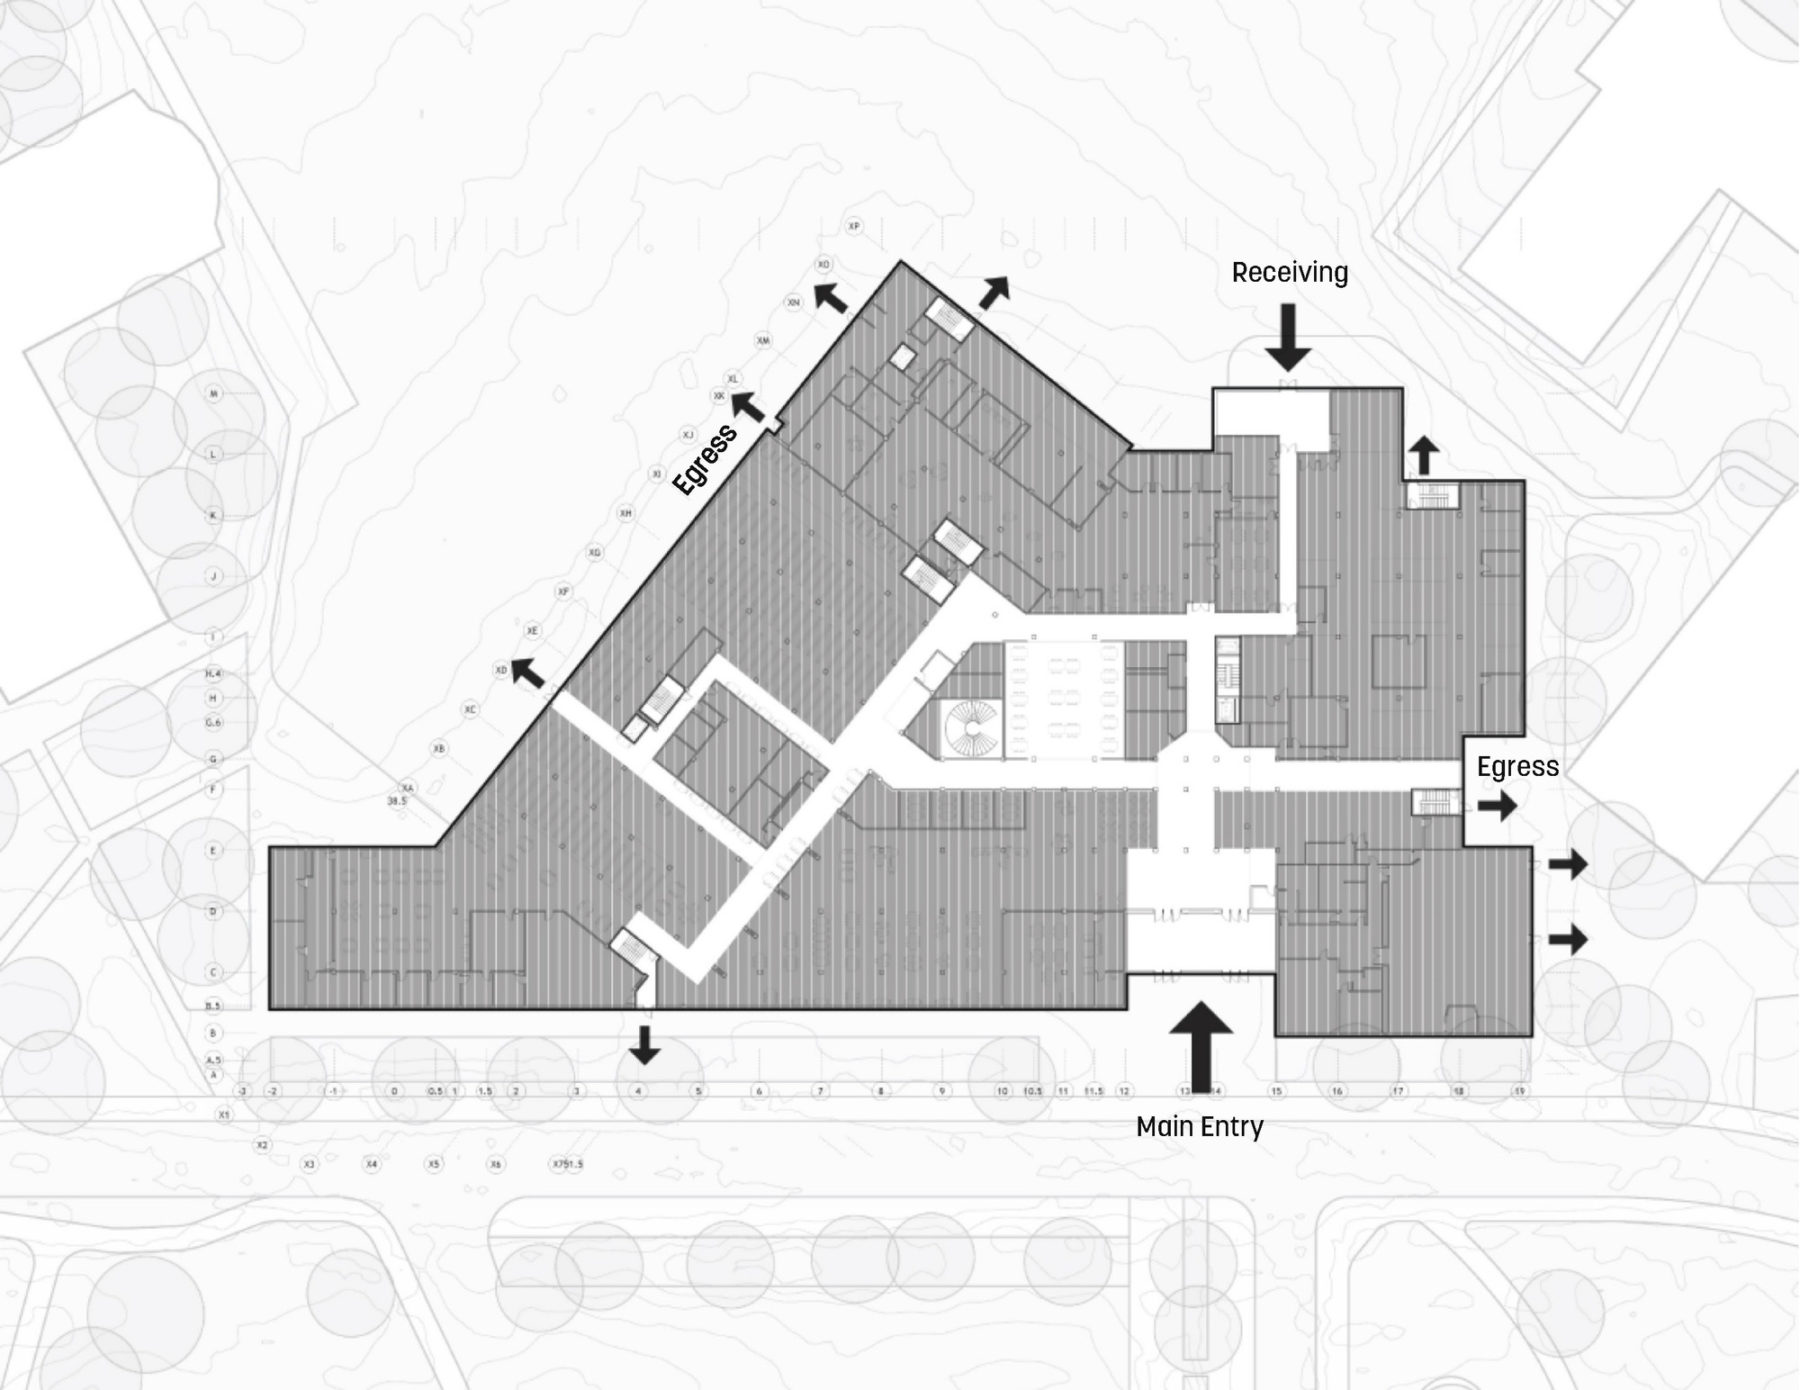 plan drawing highlighting wayfinding observations in the existing building